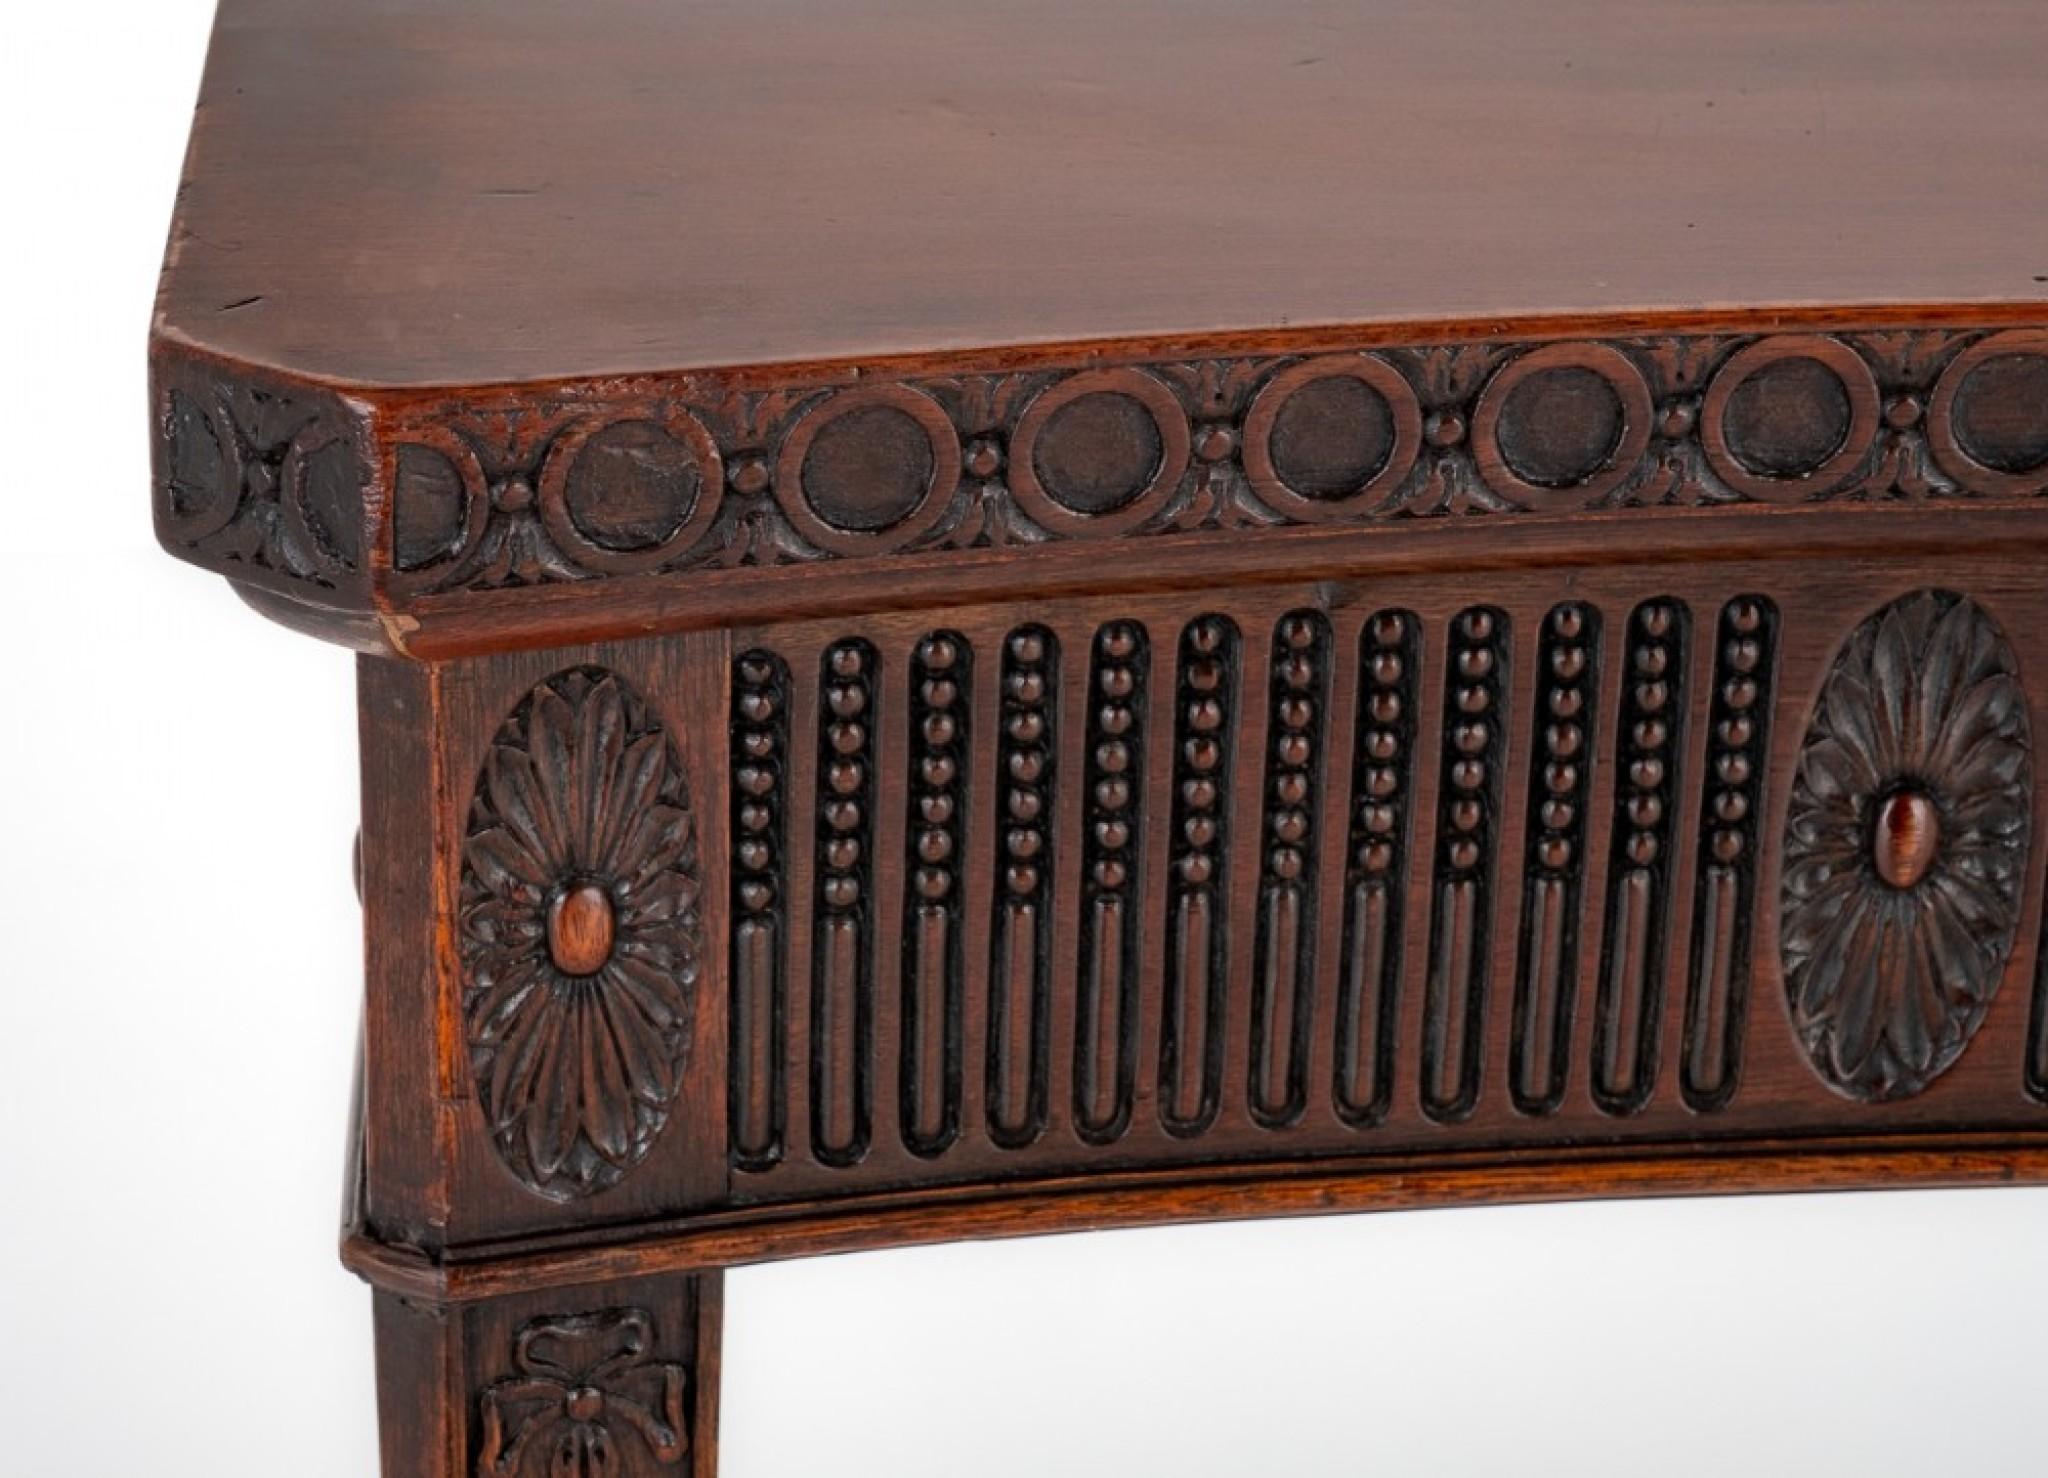 Adams Style Mahogany Server.
This Server is of a Serpentine Form Standing Upon Square Tapered Legs With Spade Feet and Feature Carved Harebells.
Circa 1860
The Front and Sides of the Server Having Carved Detail.
Having a Central Panel Featuring a